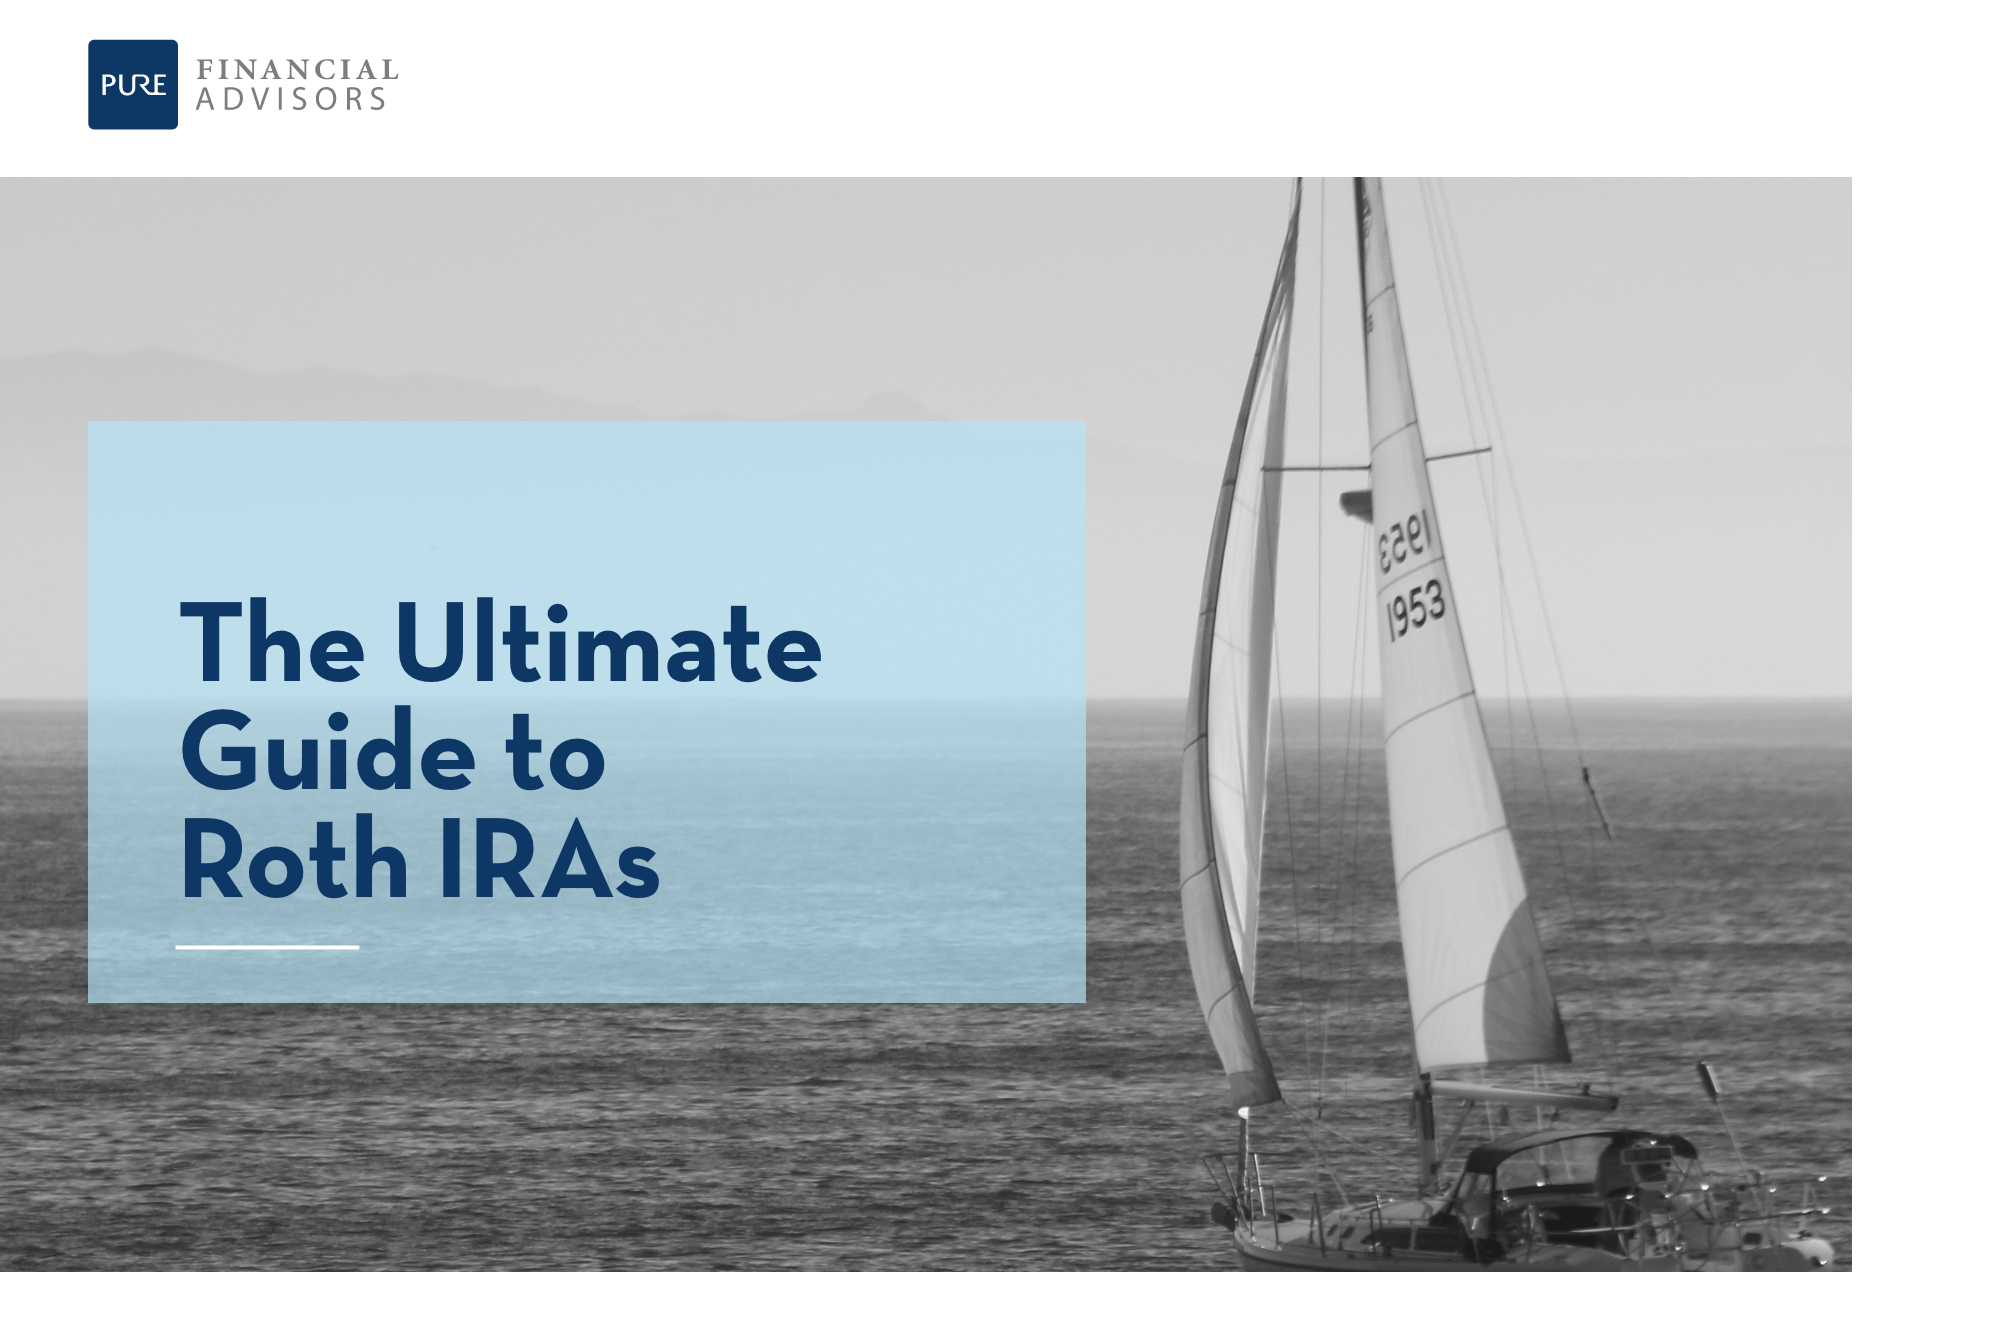 Download The Ultimate Guide to Roth IRAs